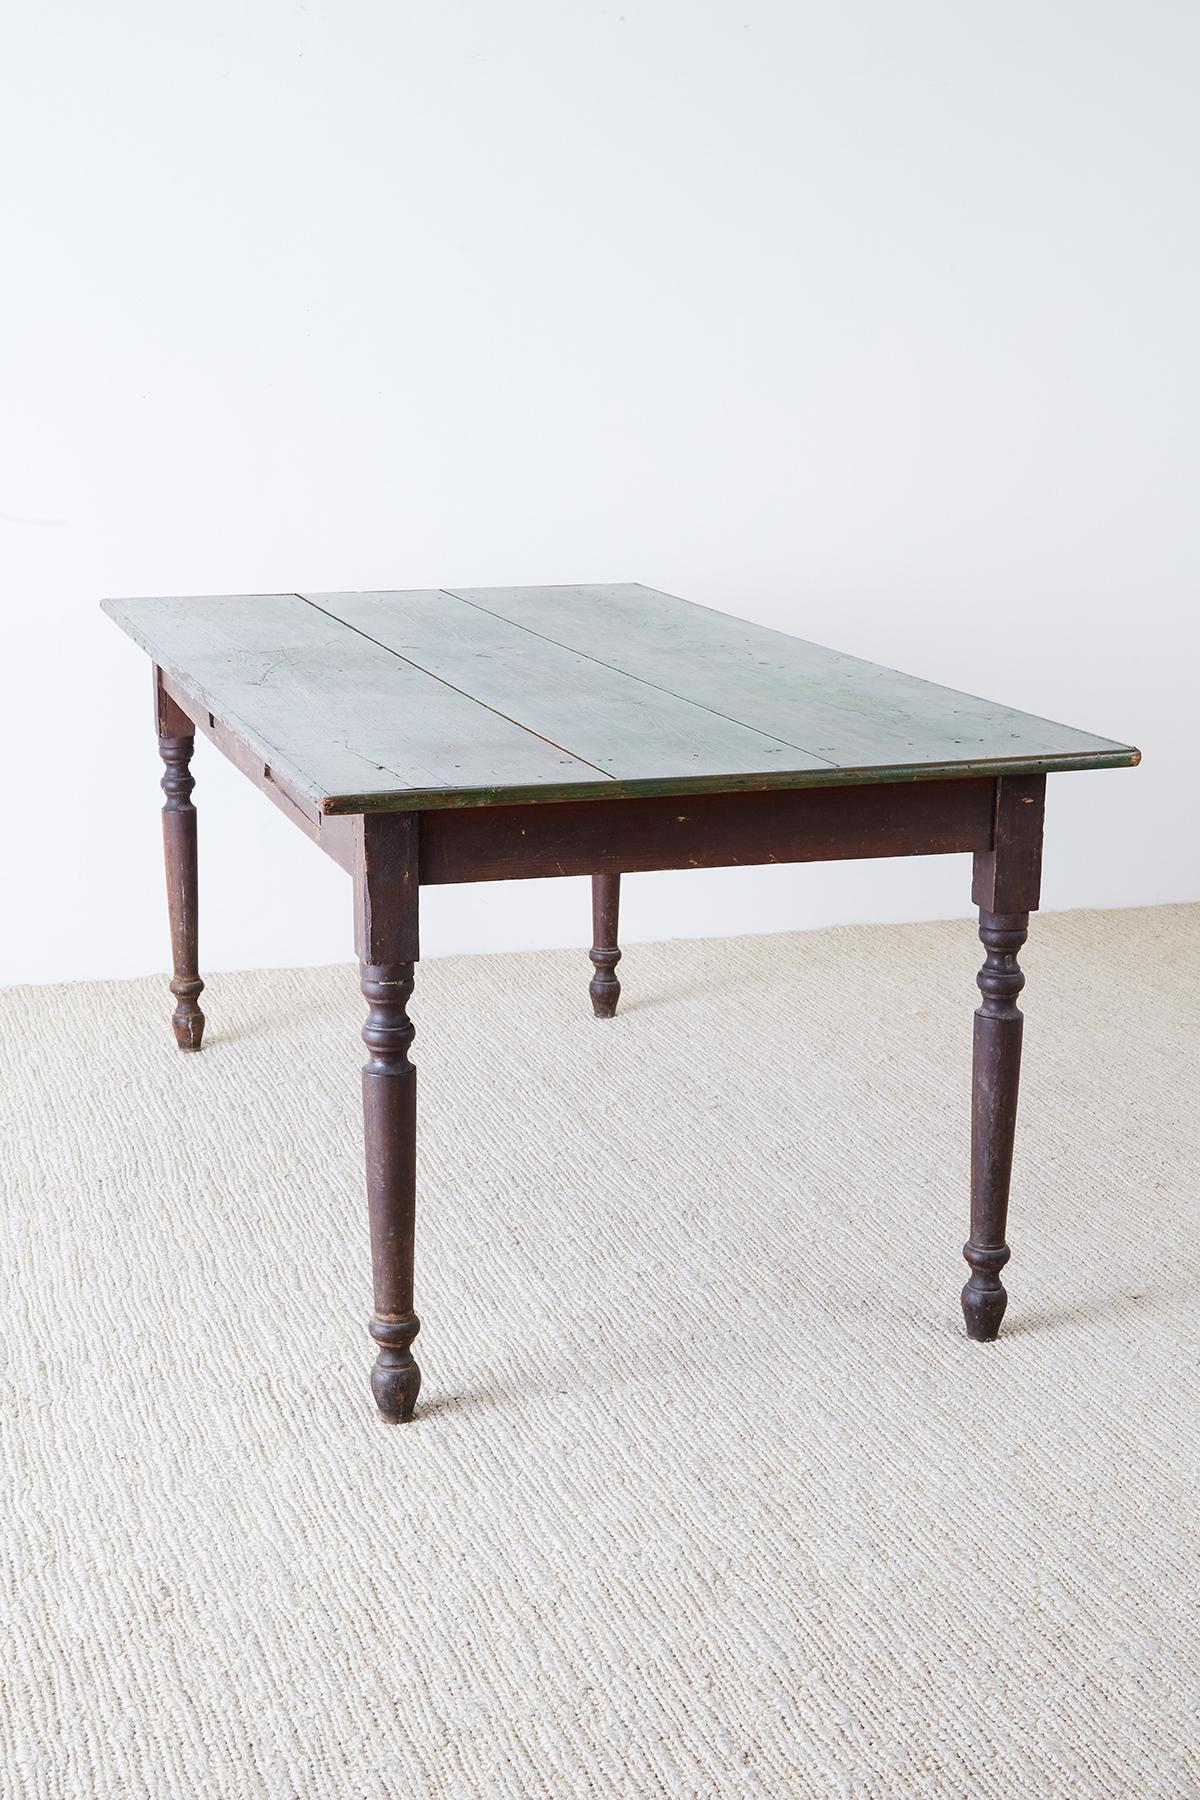 Rustic English Country Pine Farmhouse Dining Table 10